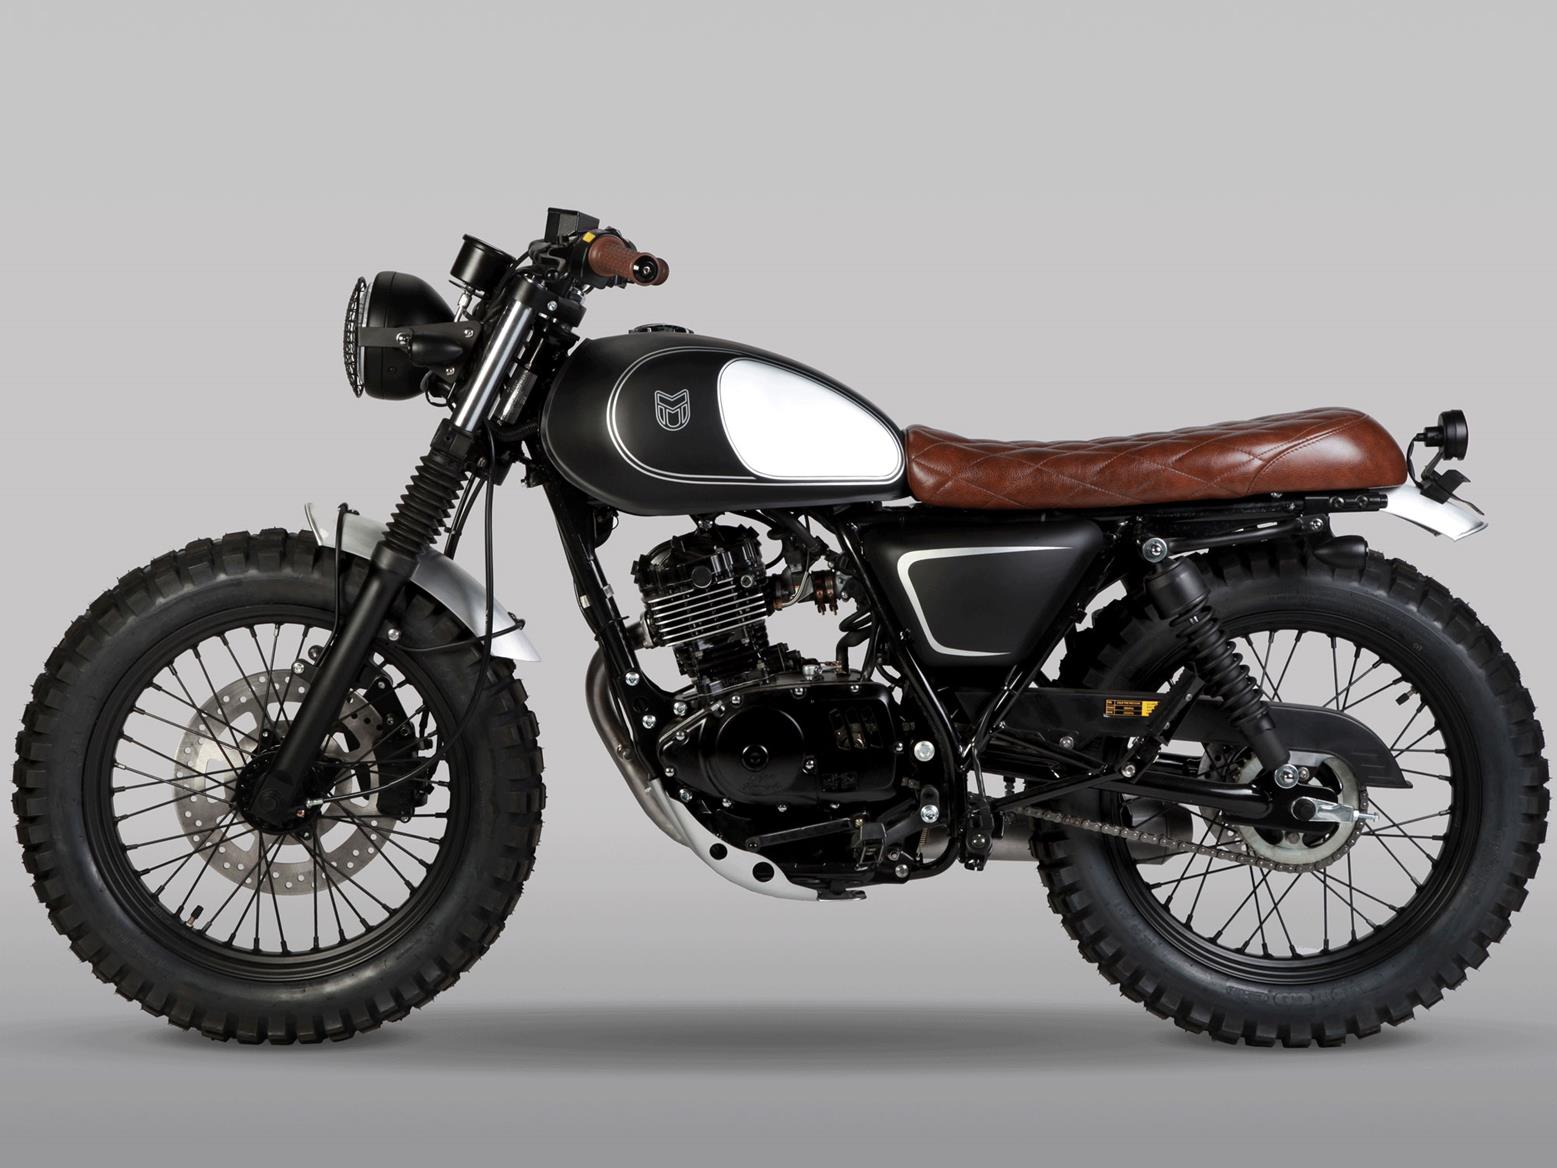 Meet The Mutt Mastiff 125 A Factory Custom With Adventure Looks And Accessible Running Costs Mcn